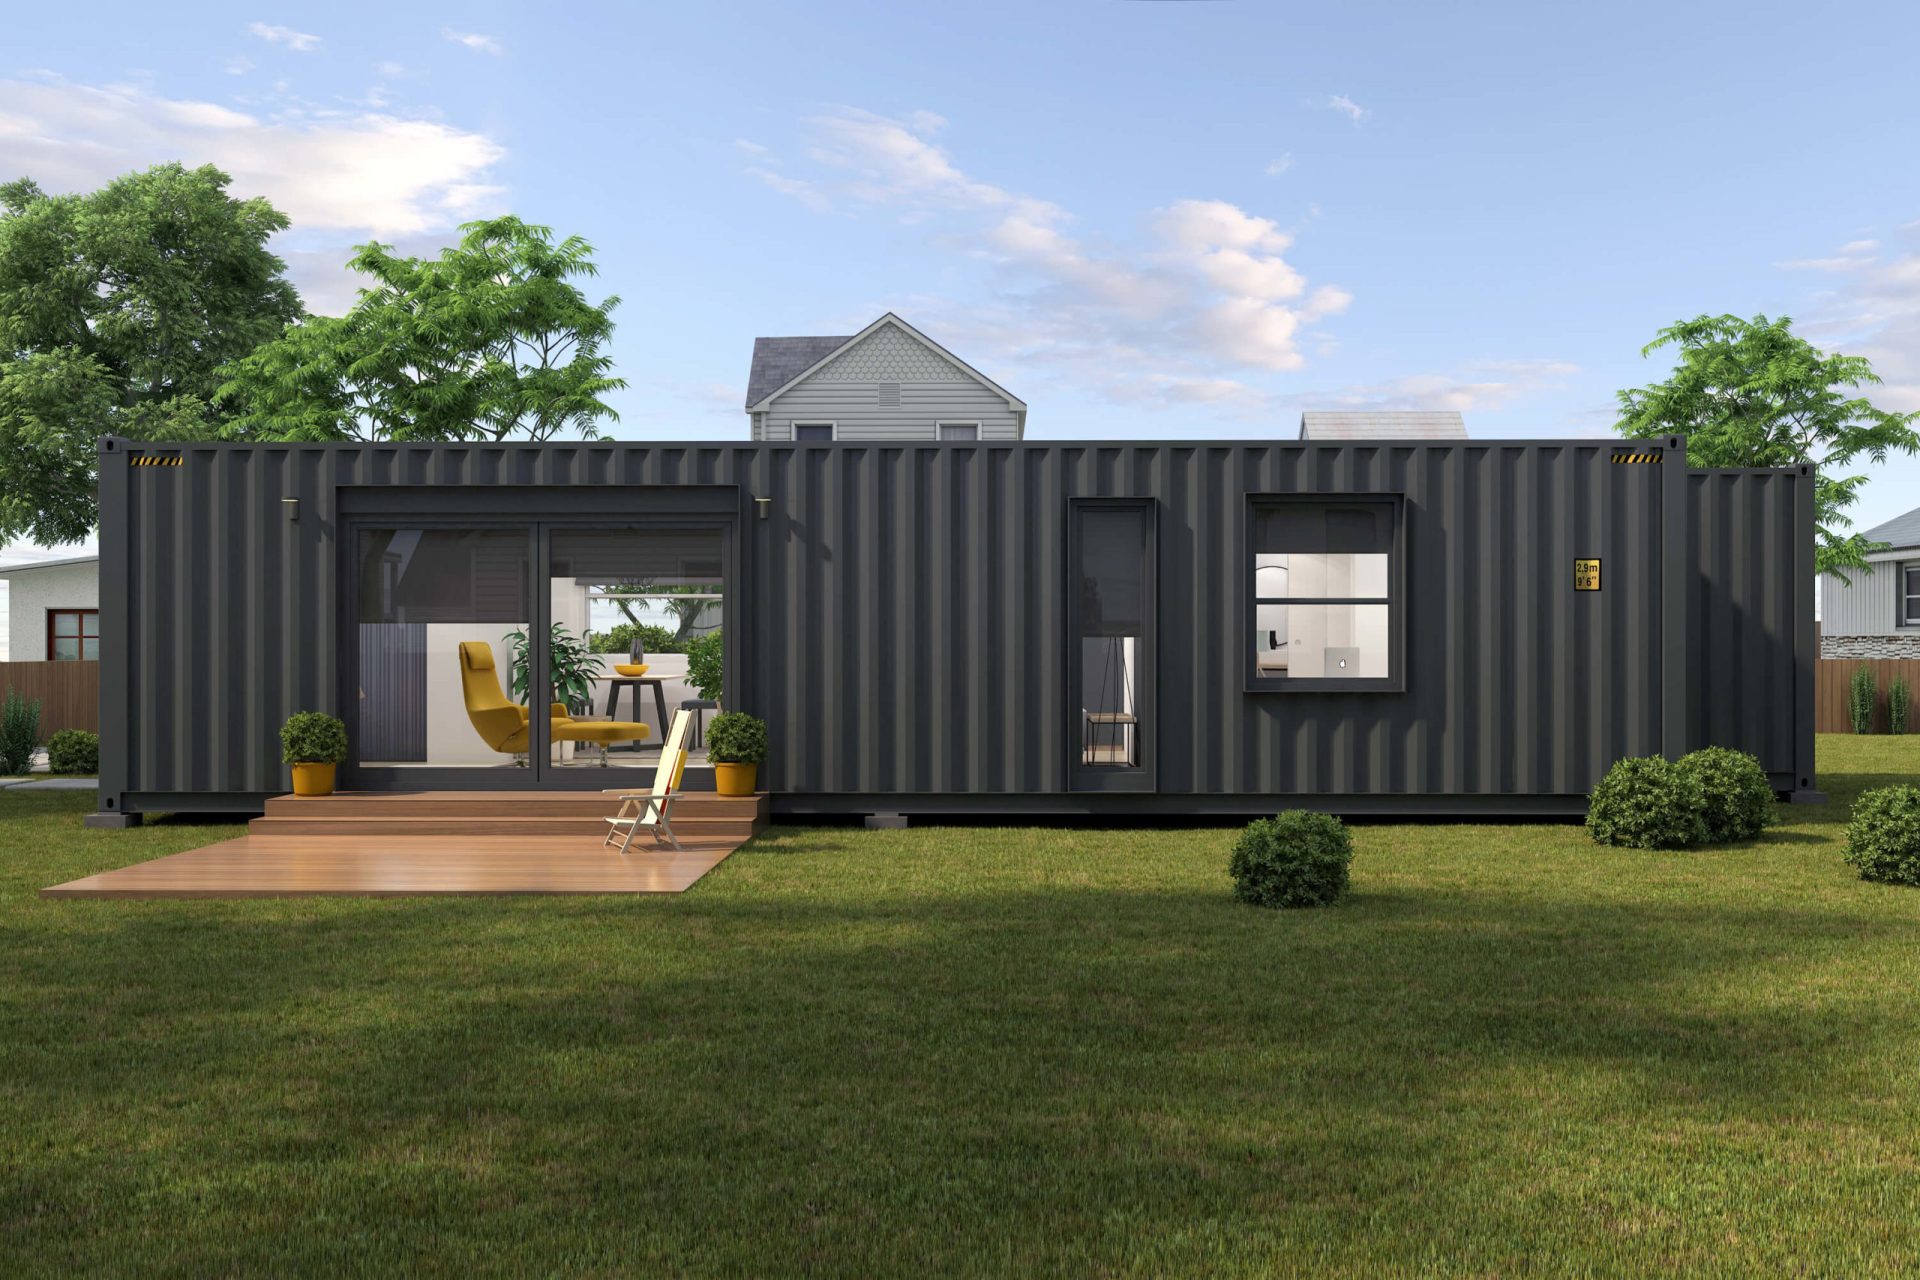 The Shipping Container Furnished Walkthrough